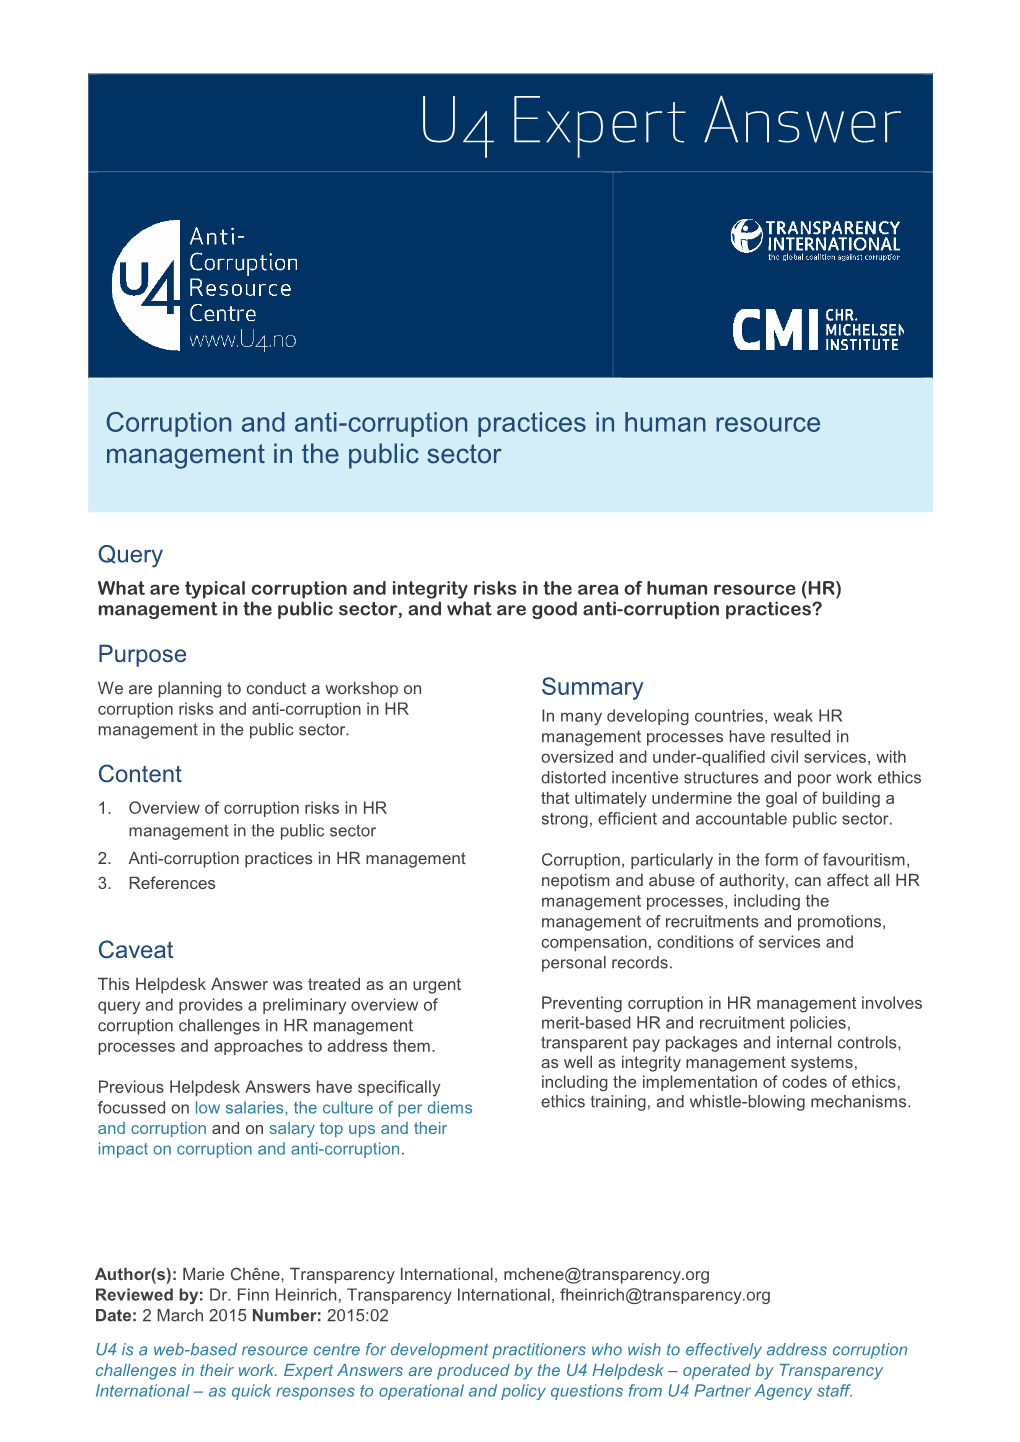 Corruption in HR Management Involves Corruption Challenges in HR Management Merit-Based HR and Recruitment Policies, Processes and Approaches to Address Them